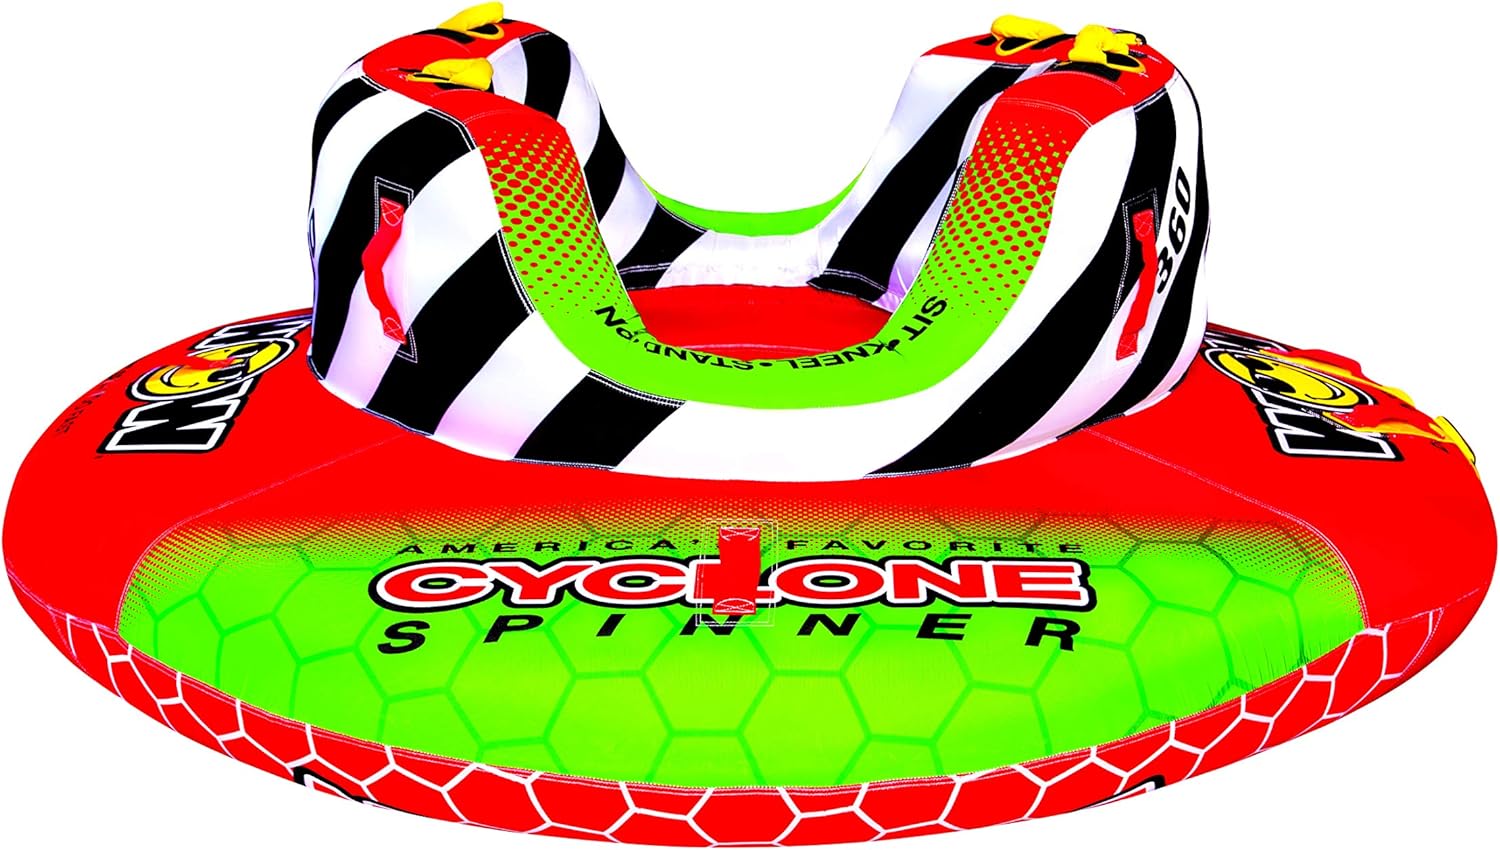 WOW Watersports 20-1070 Towable Cyclone Spinner 1-2 Person, Red